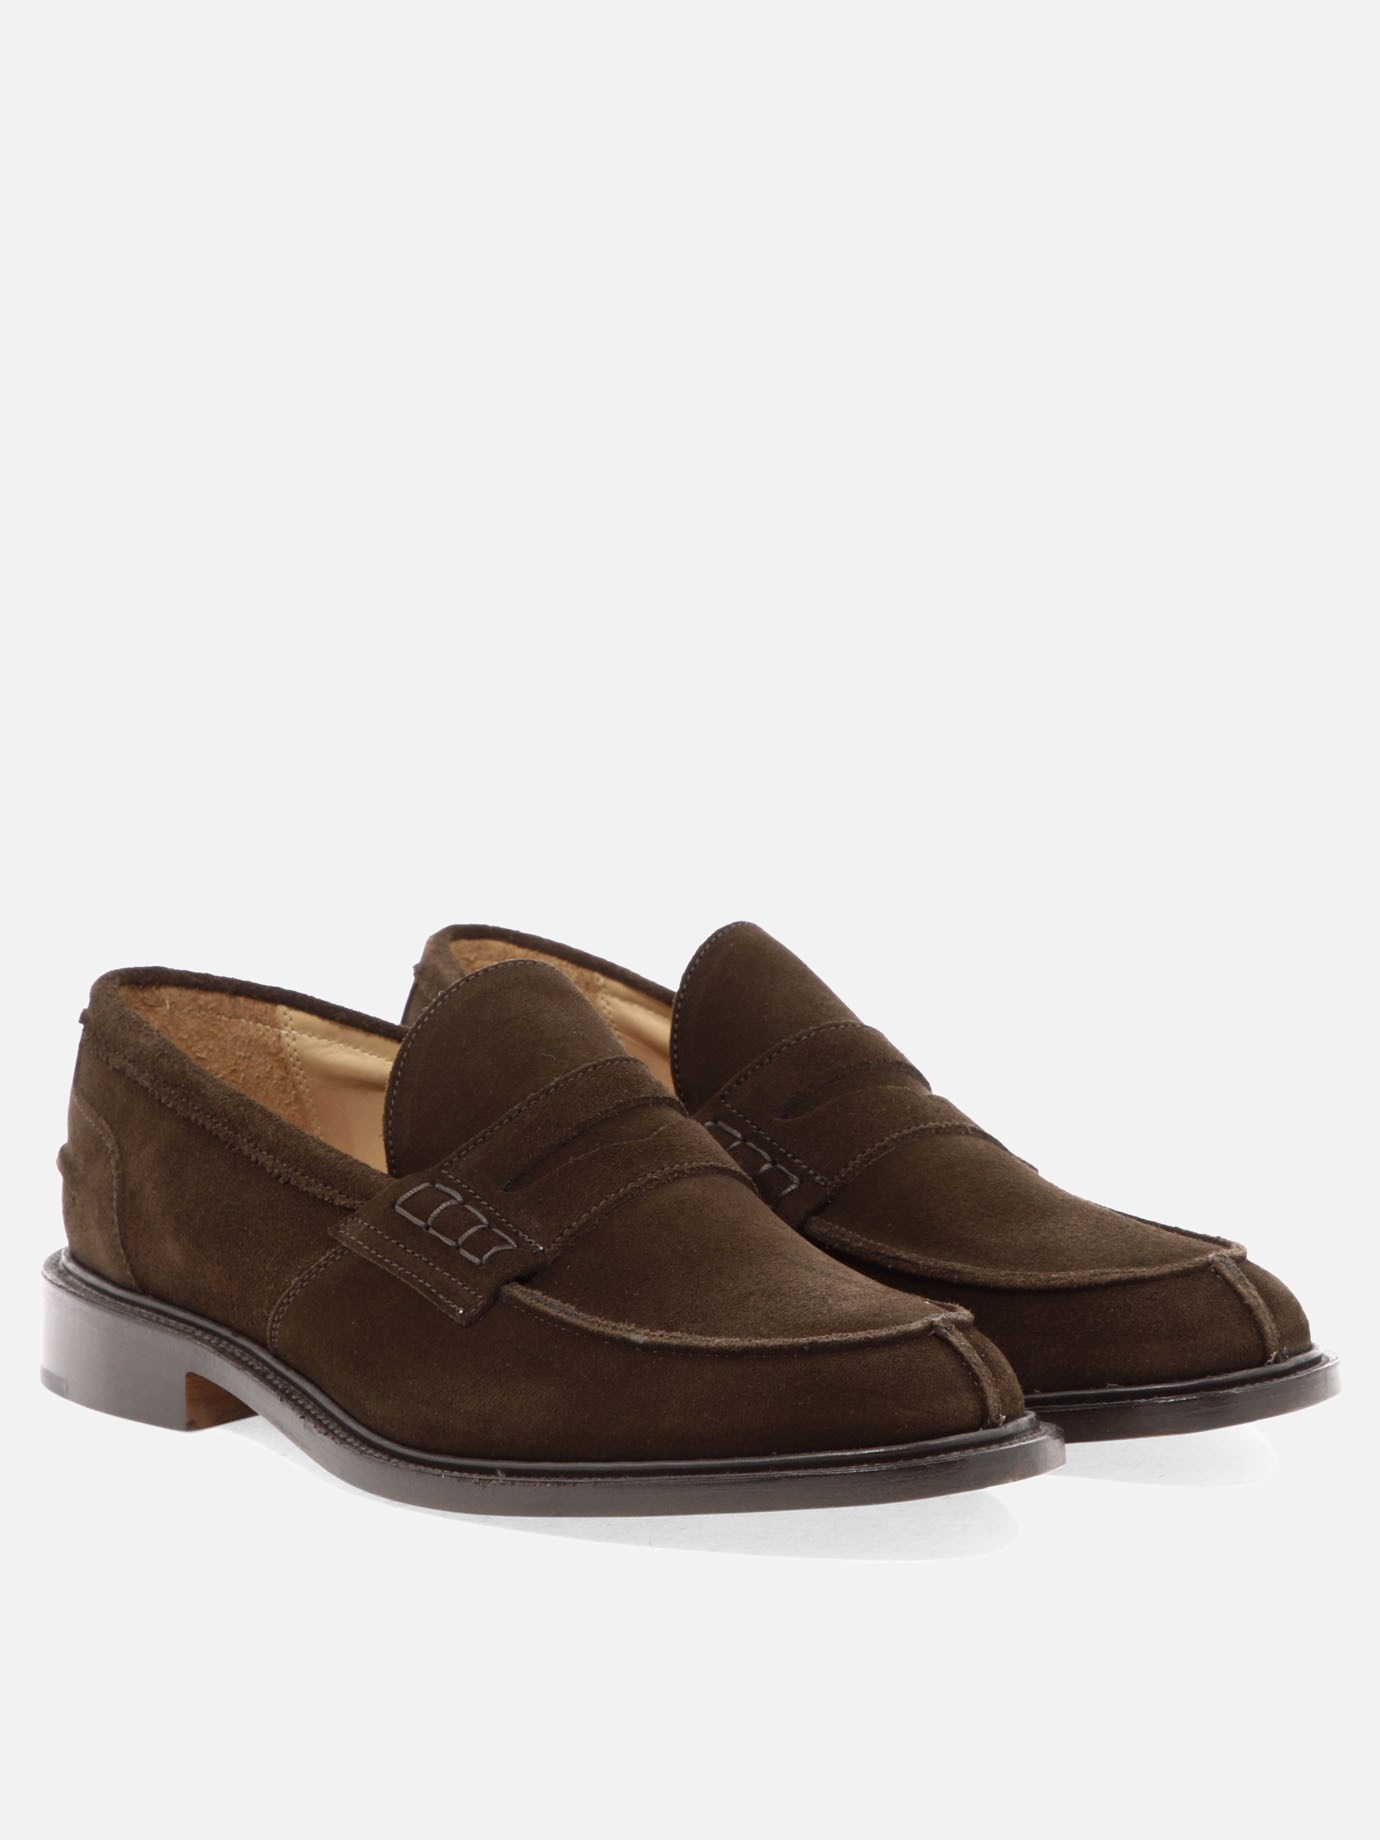  James  loafers by Tricker's